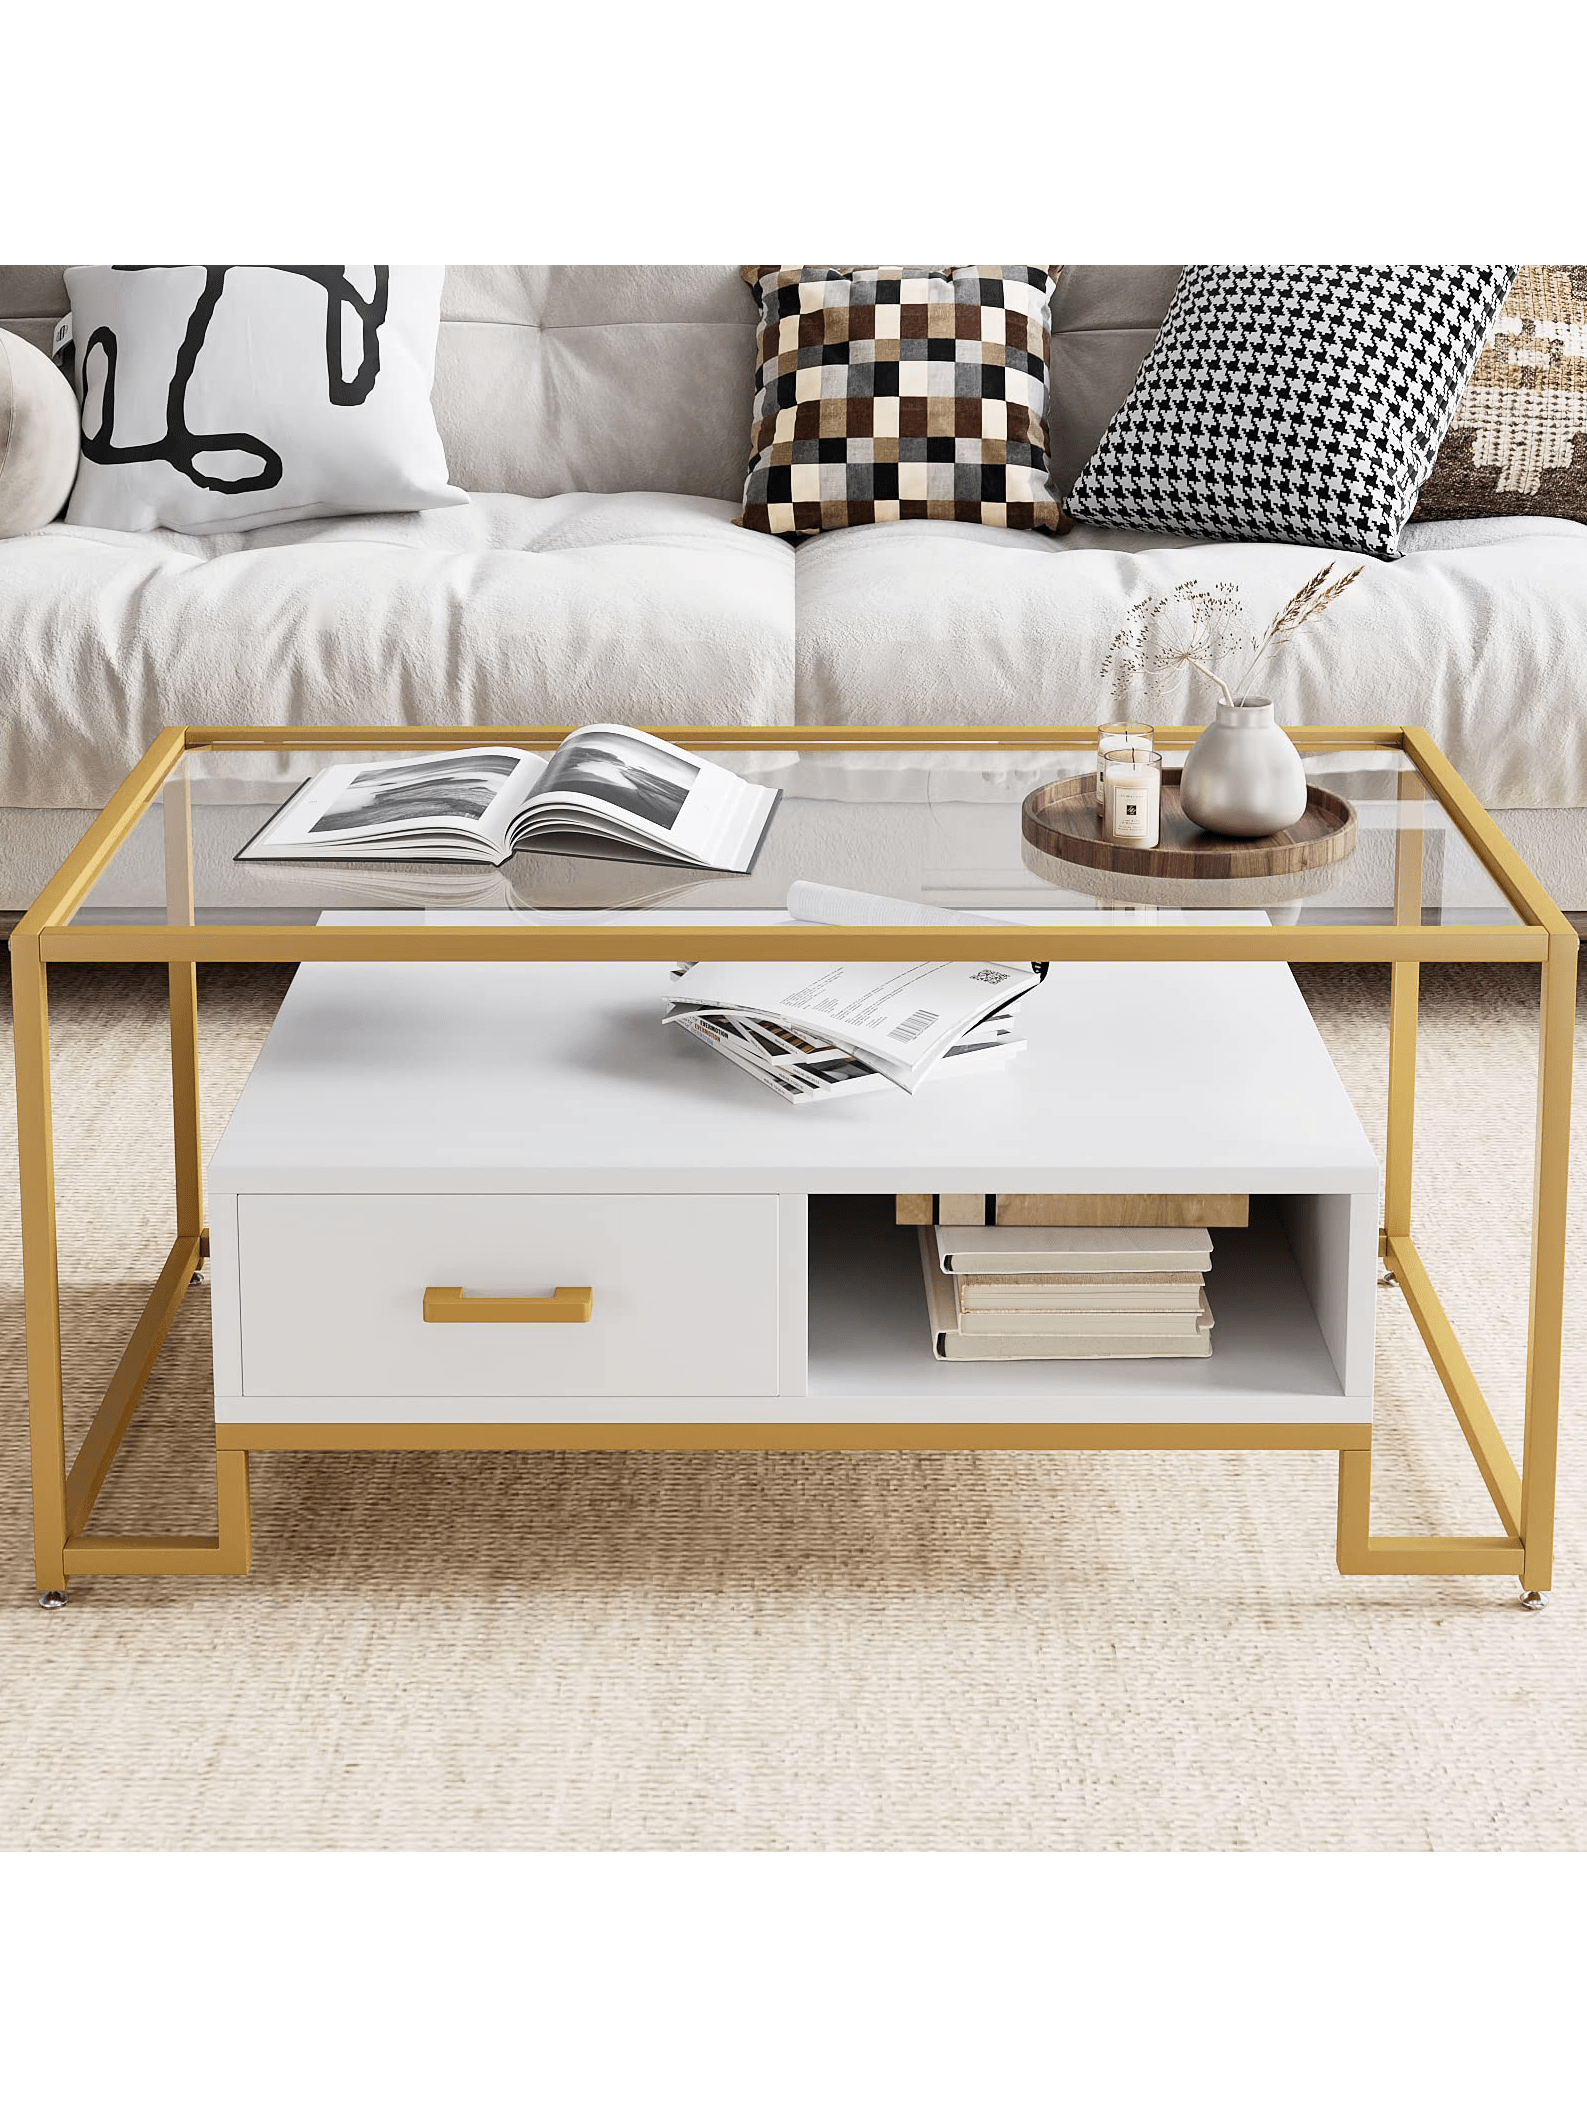 Glass Coffee Table With Drawer And Open Storage Shelf, Tempered Glass Top  And Metal Frame, Modern Simple Center Table For Home Living Room Apartment  Office | Shein Usa Inside Coffee Tables With Open Storage Shelves (View 13 of 15)